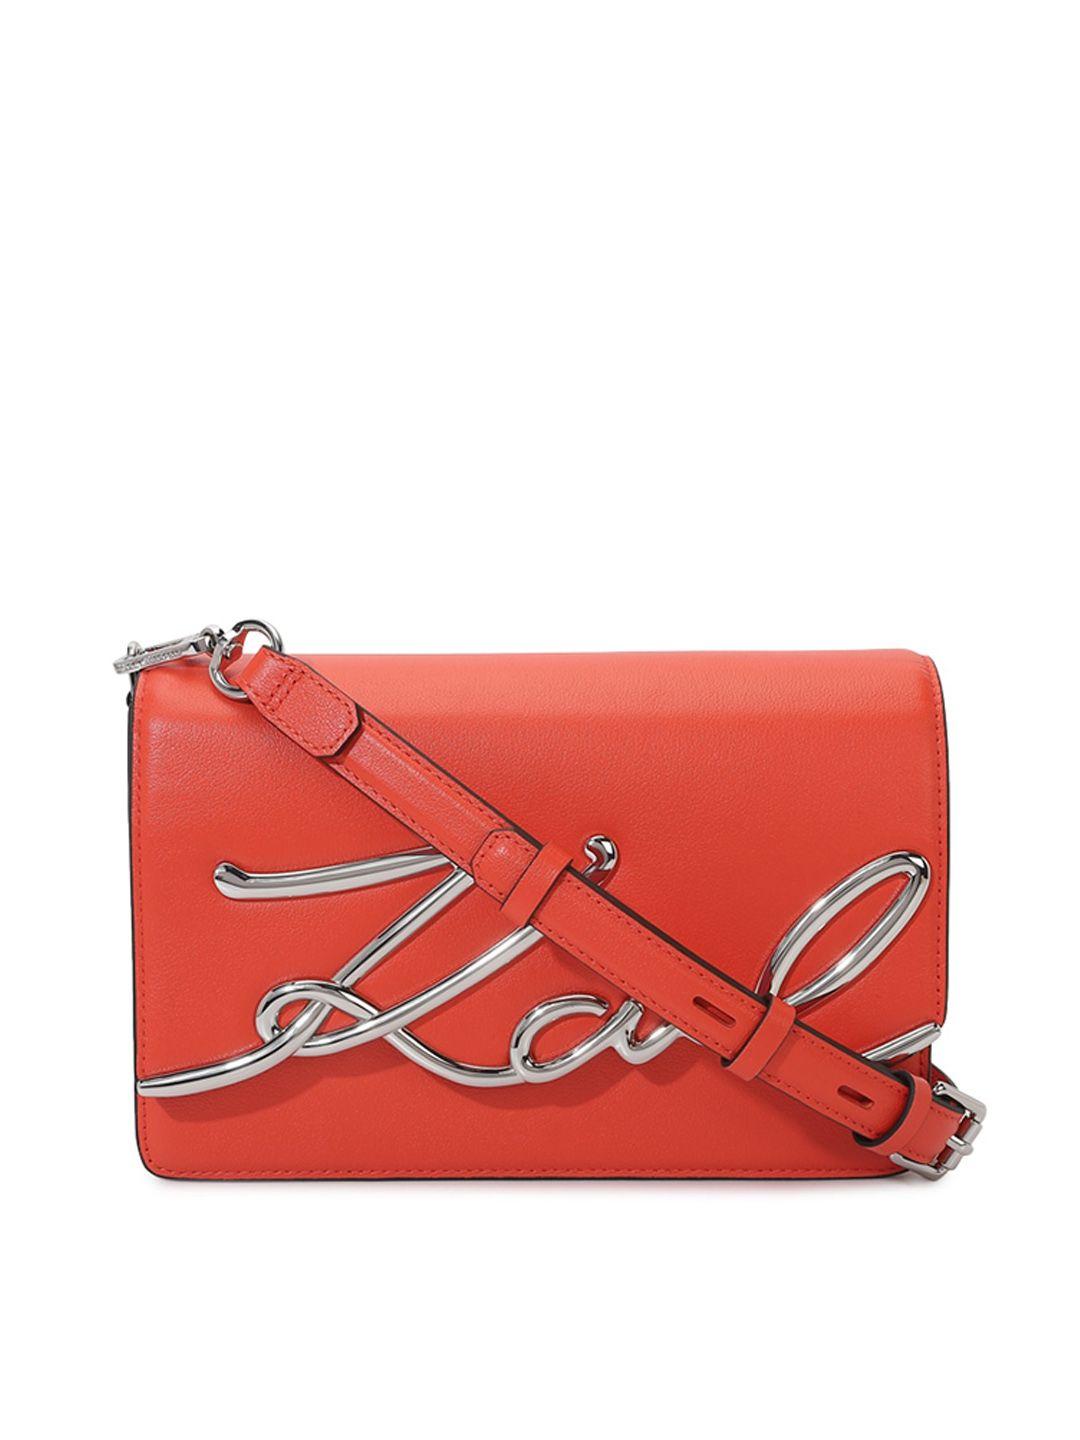 karl lagerfeld red textured leather swagger sling bag